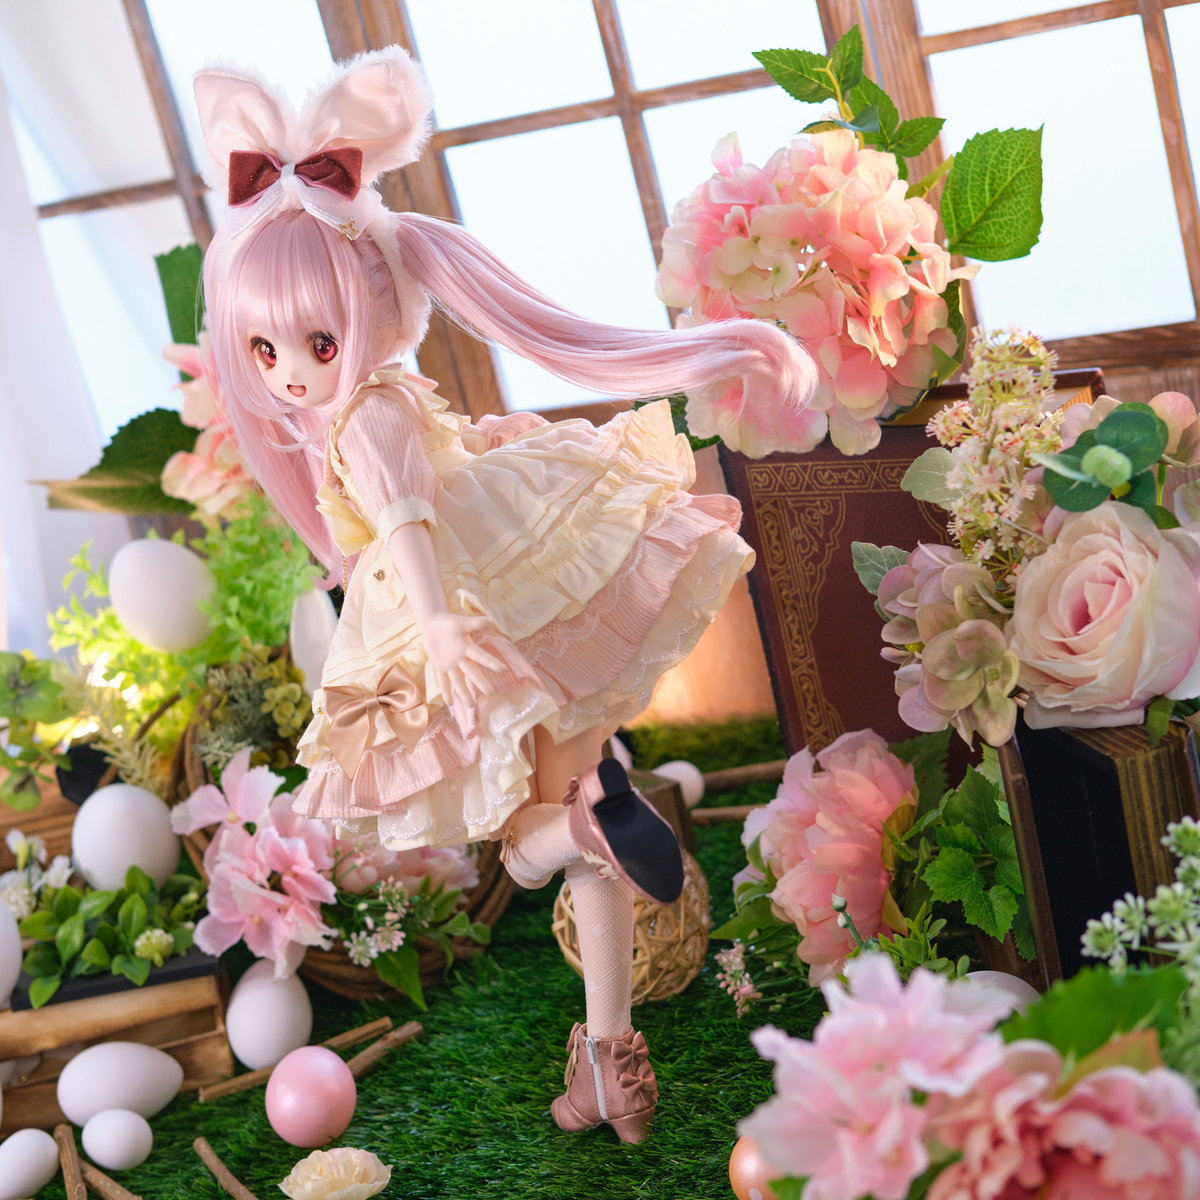 80 cm anime TPE doll - Other Dolls - DollDreaming